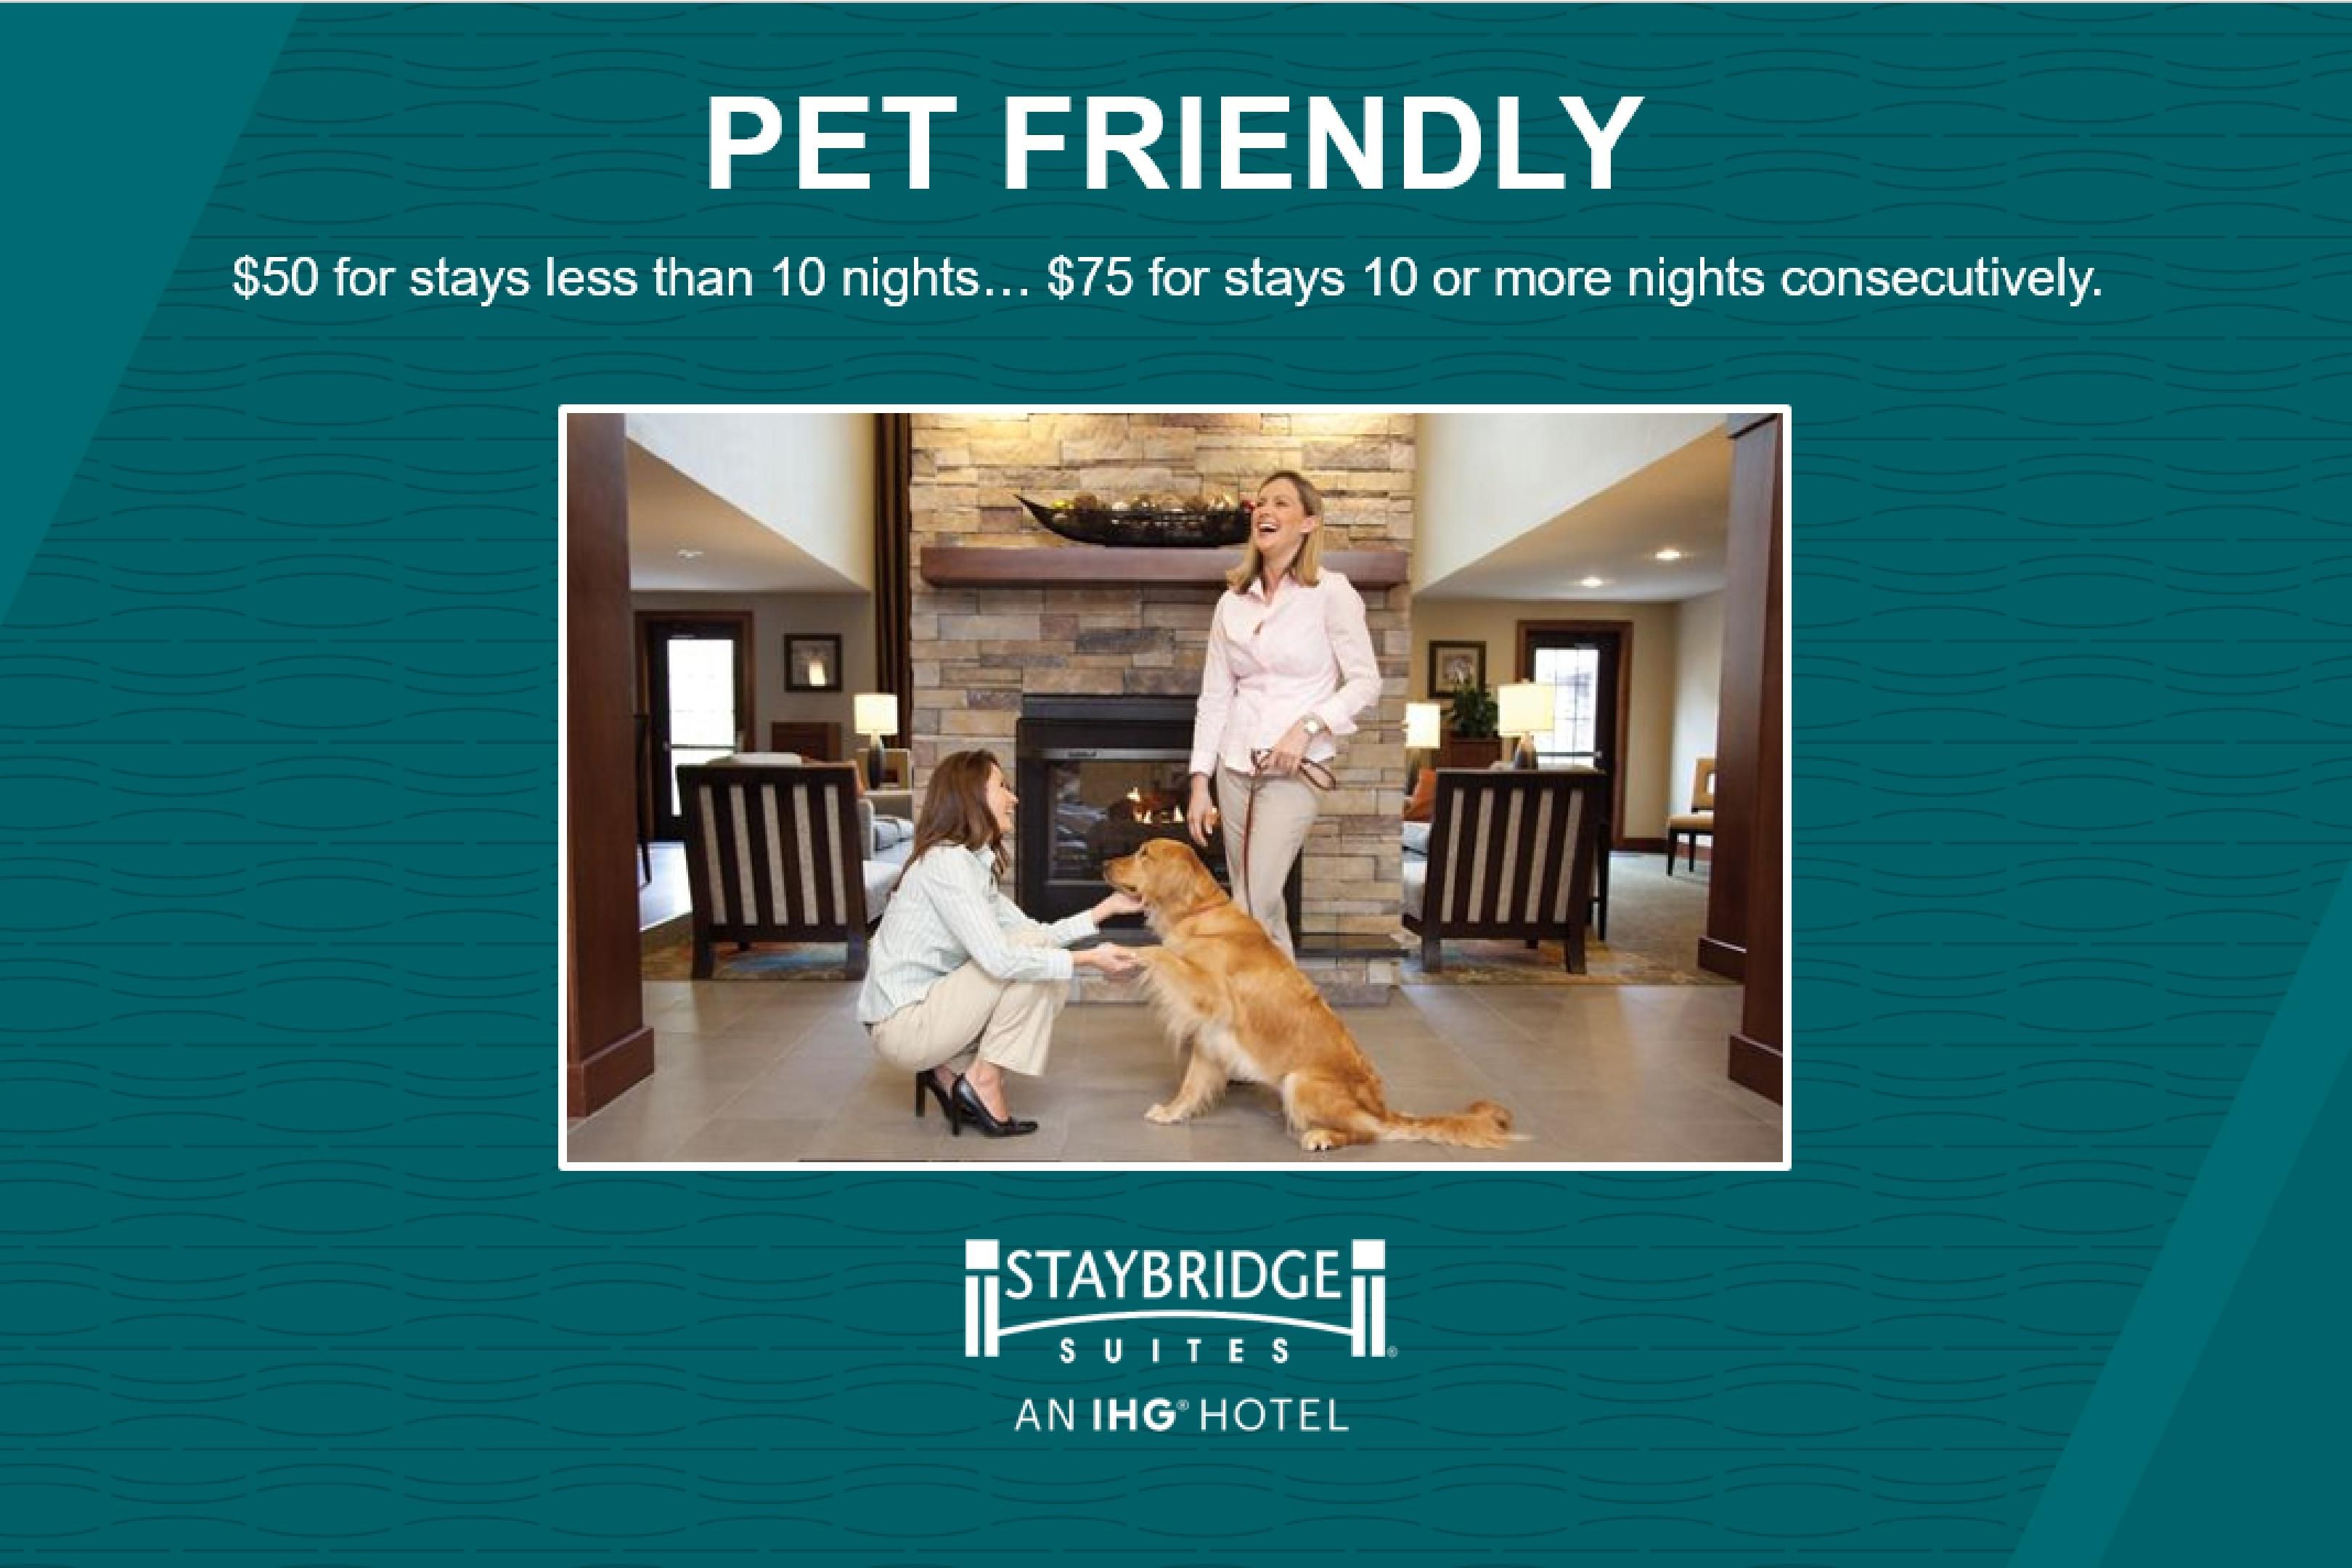 Bring your pet! We are a pet friendly hotel, so you can bring your 4 legged family with you on your travels. 